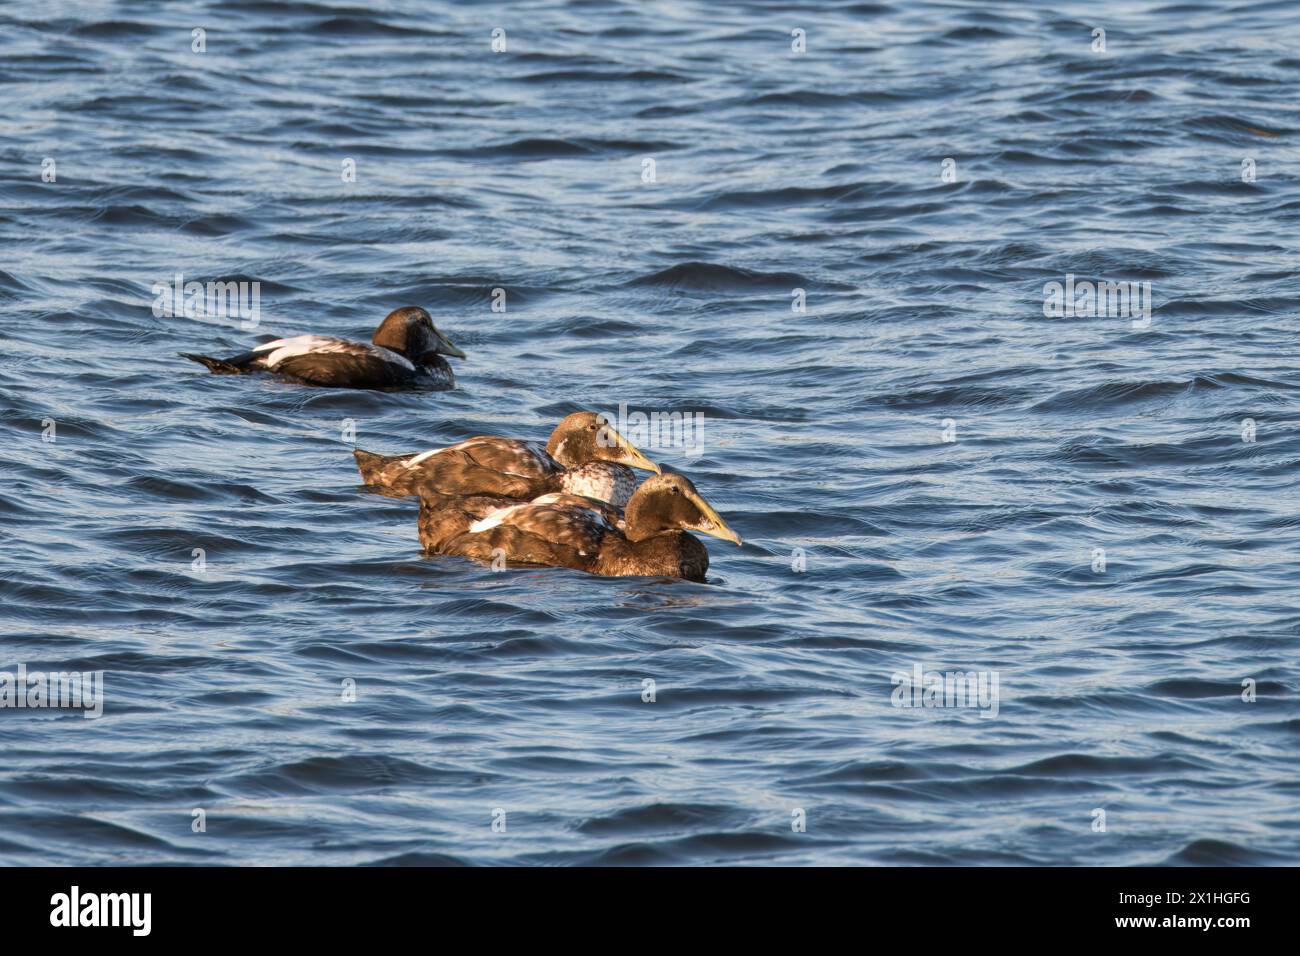 Eiders, Somateria mollissima, adults in eclipse plumage swimming in golden hour light, Limfjord, Nordjylland, Denmark Stock Photo